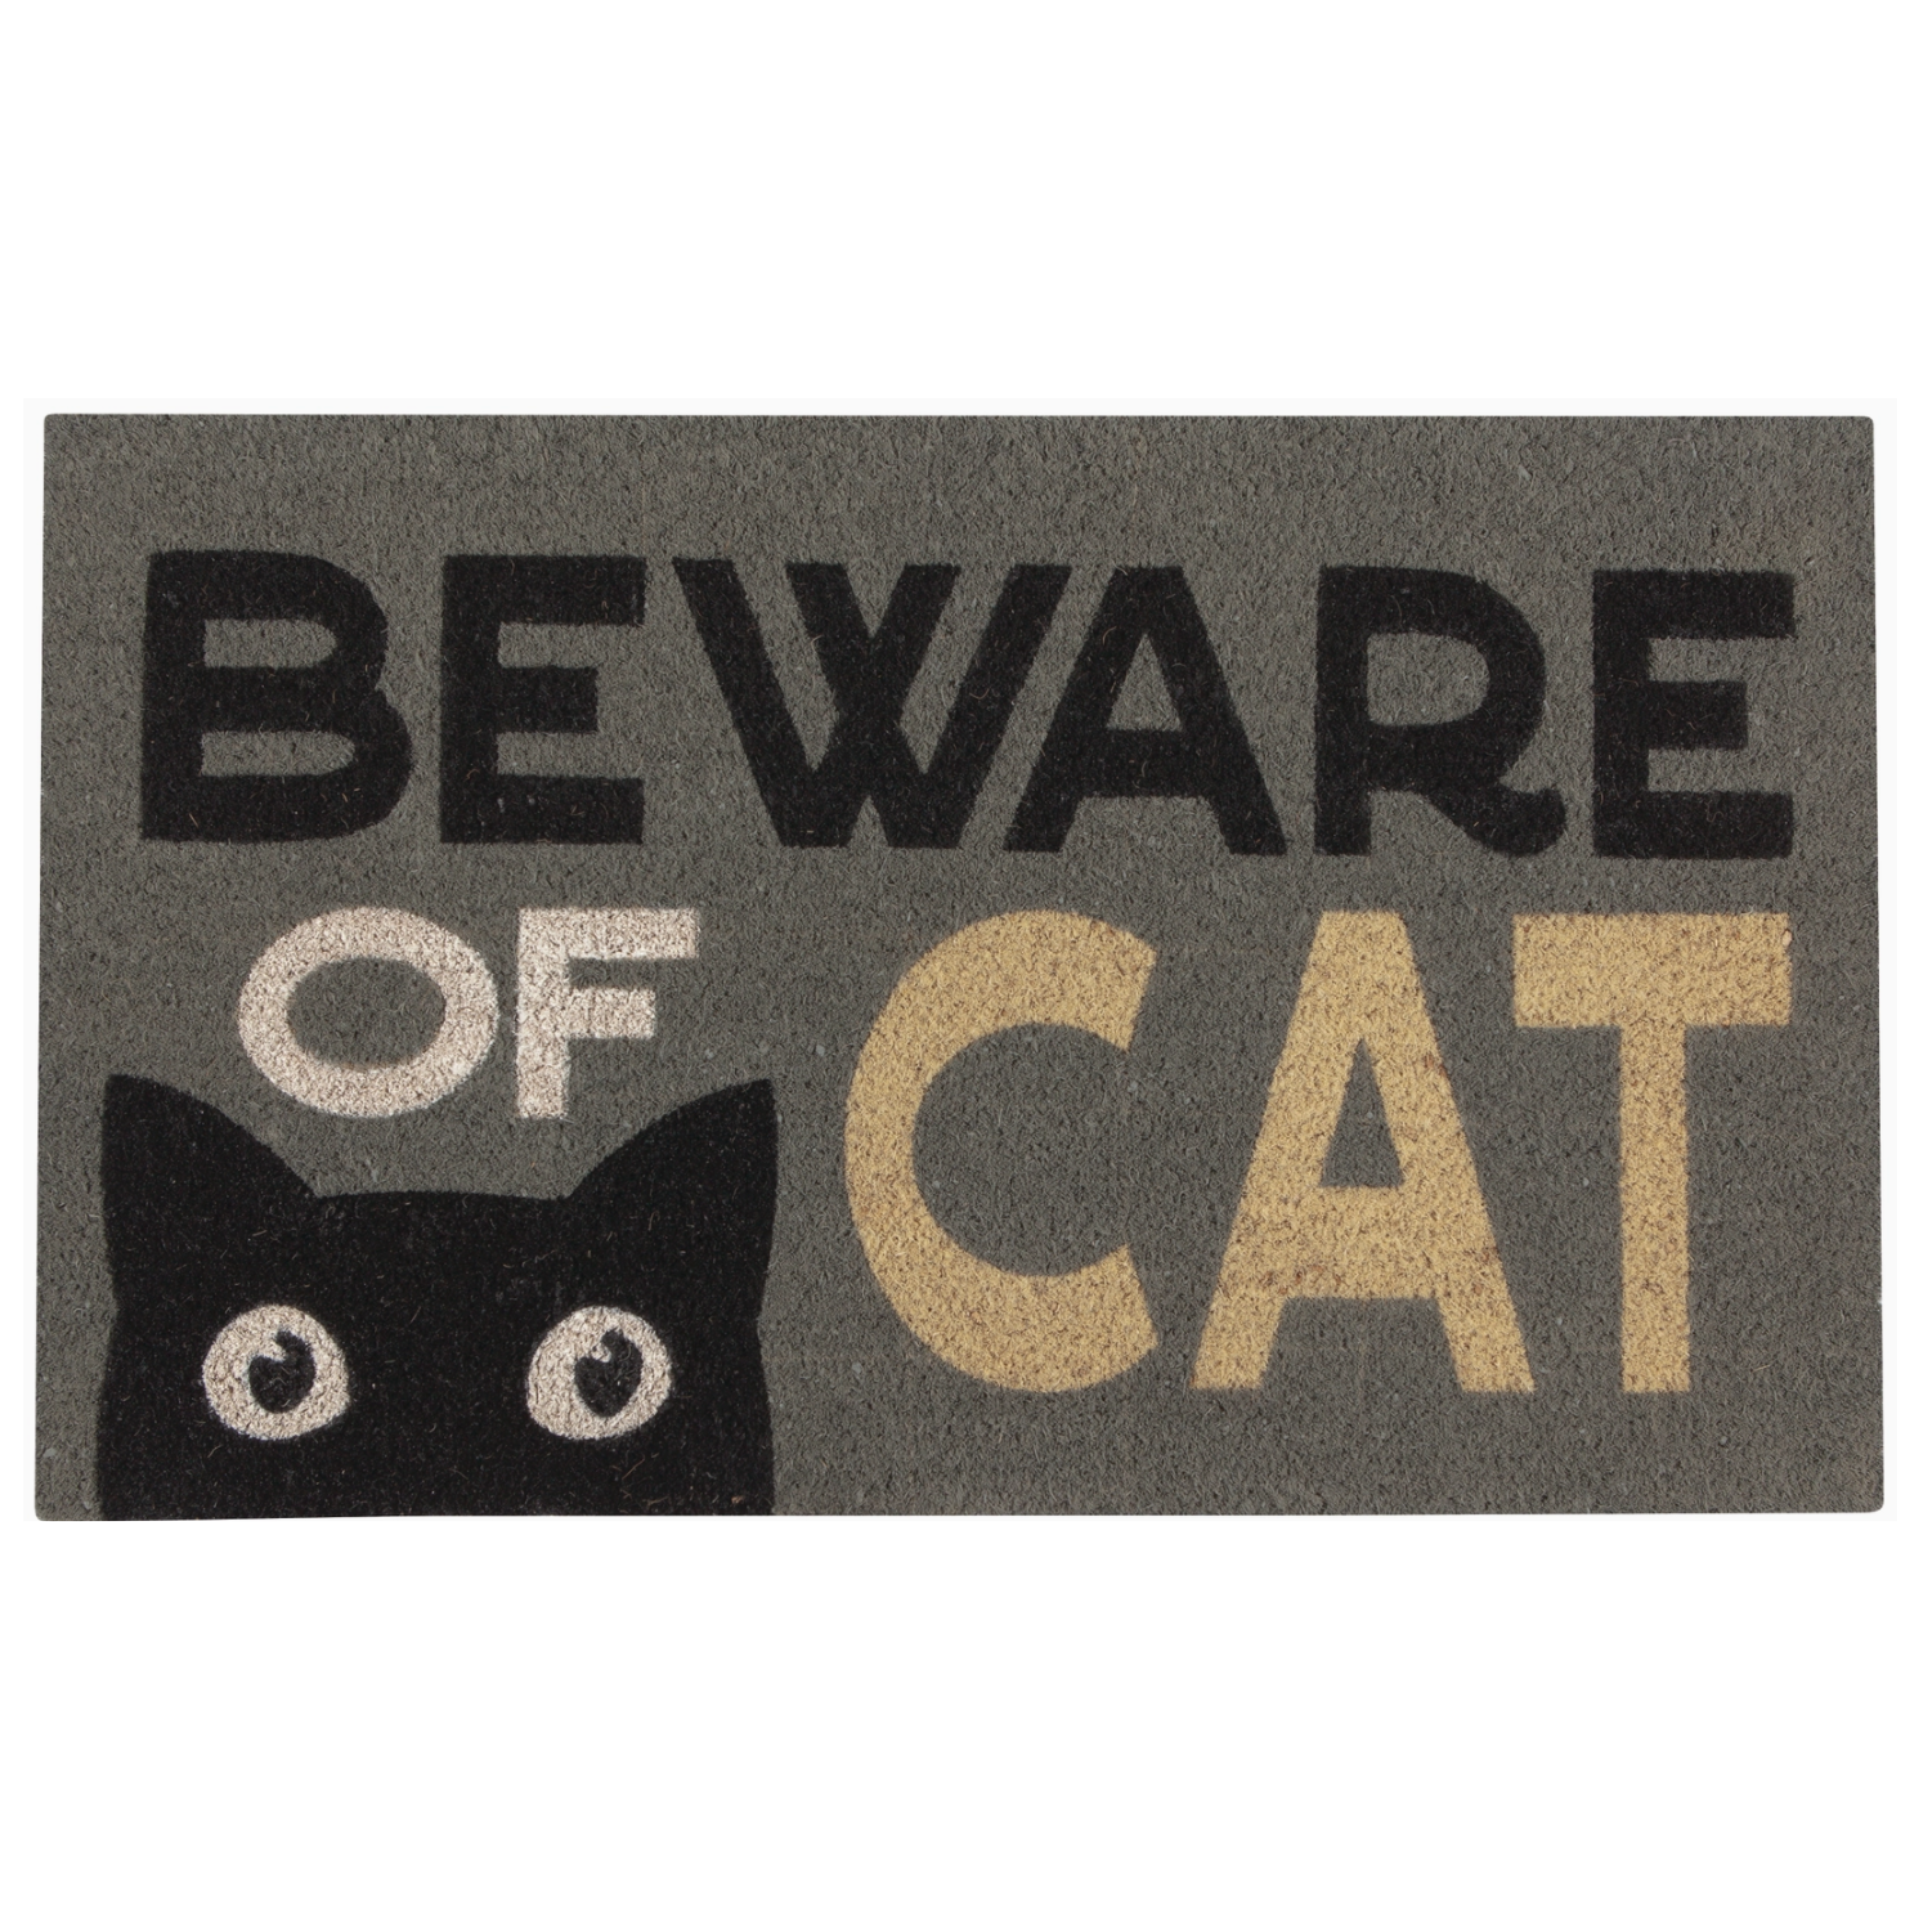 A charming grey doormat adorned with the words "Beware Of The Cat" and a cute black cat peeking over the edge, adding a touch of whimsy to any doorstep.